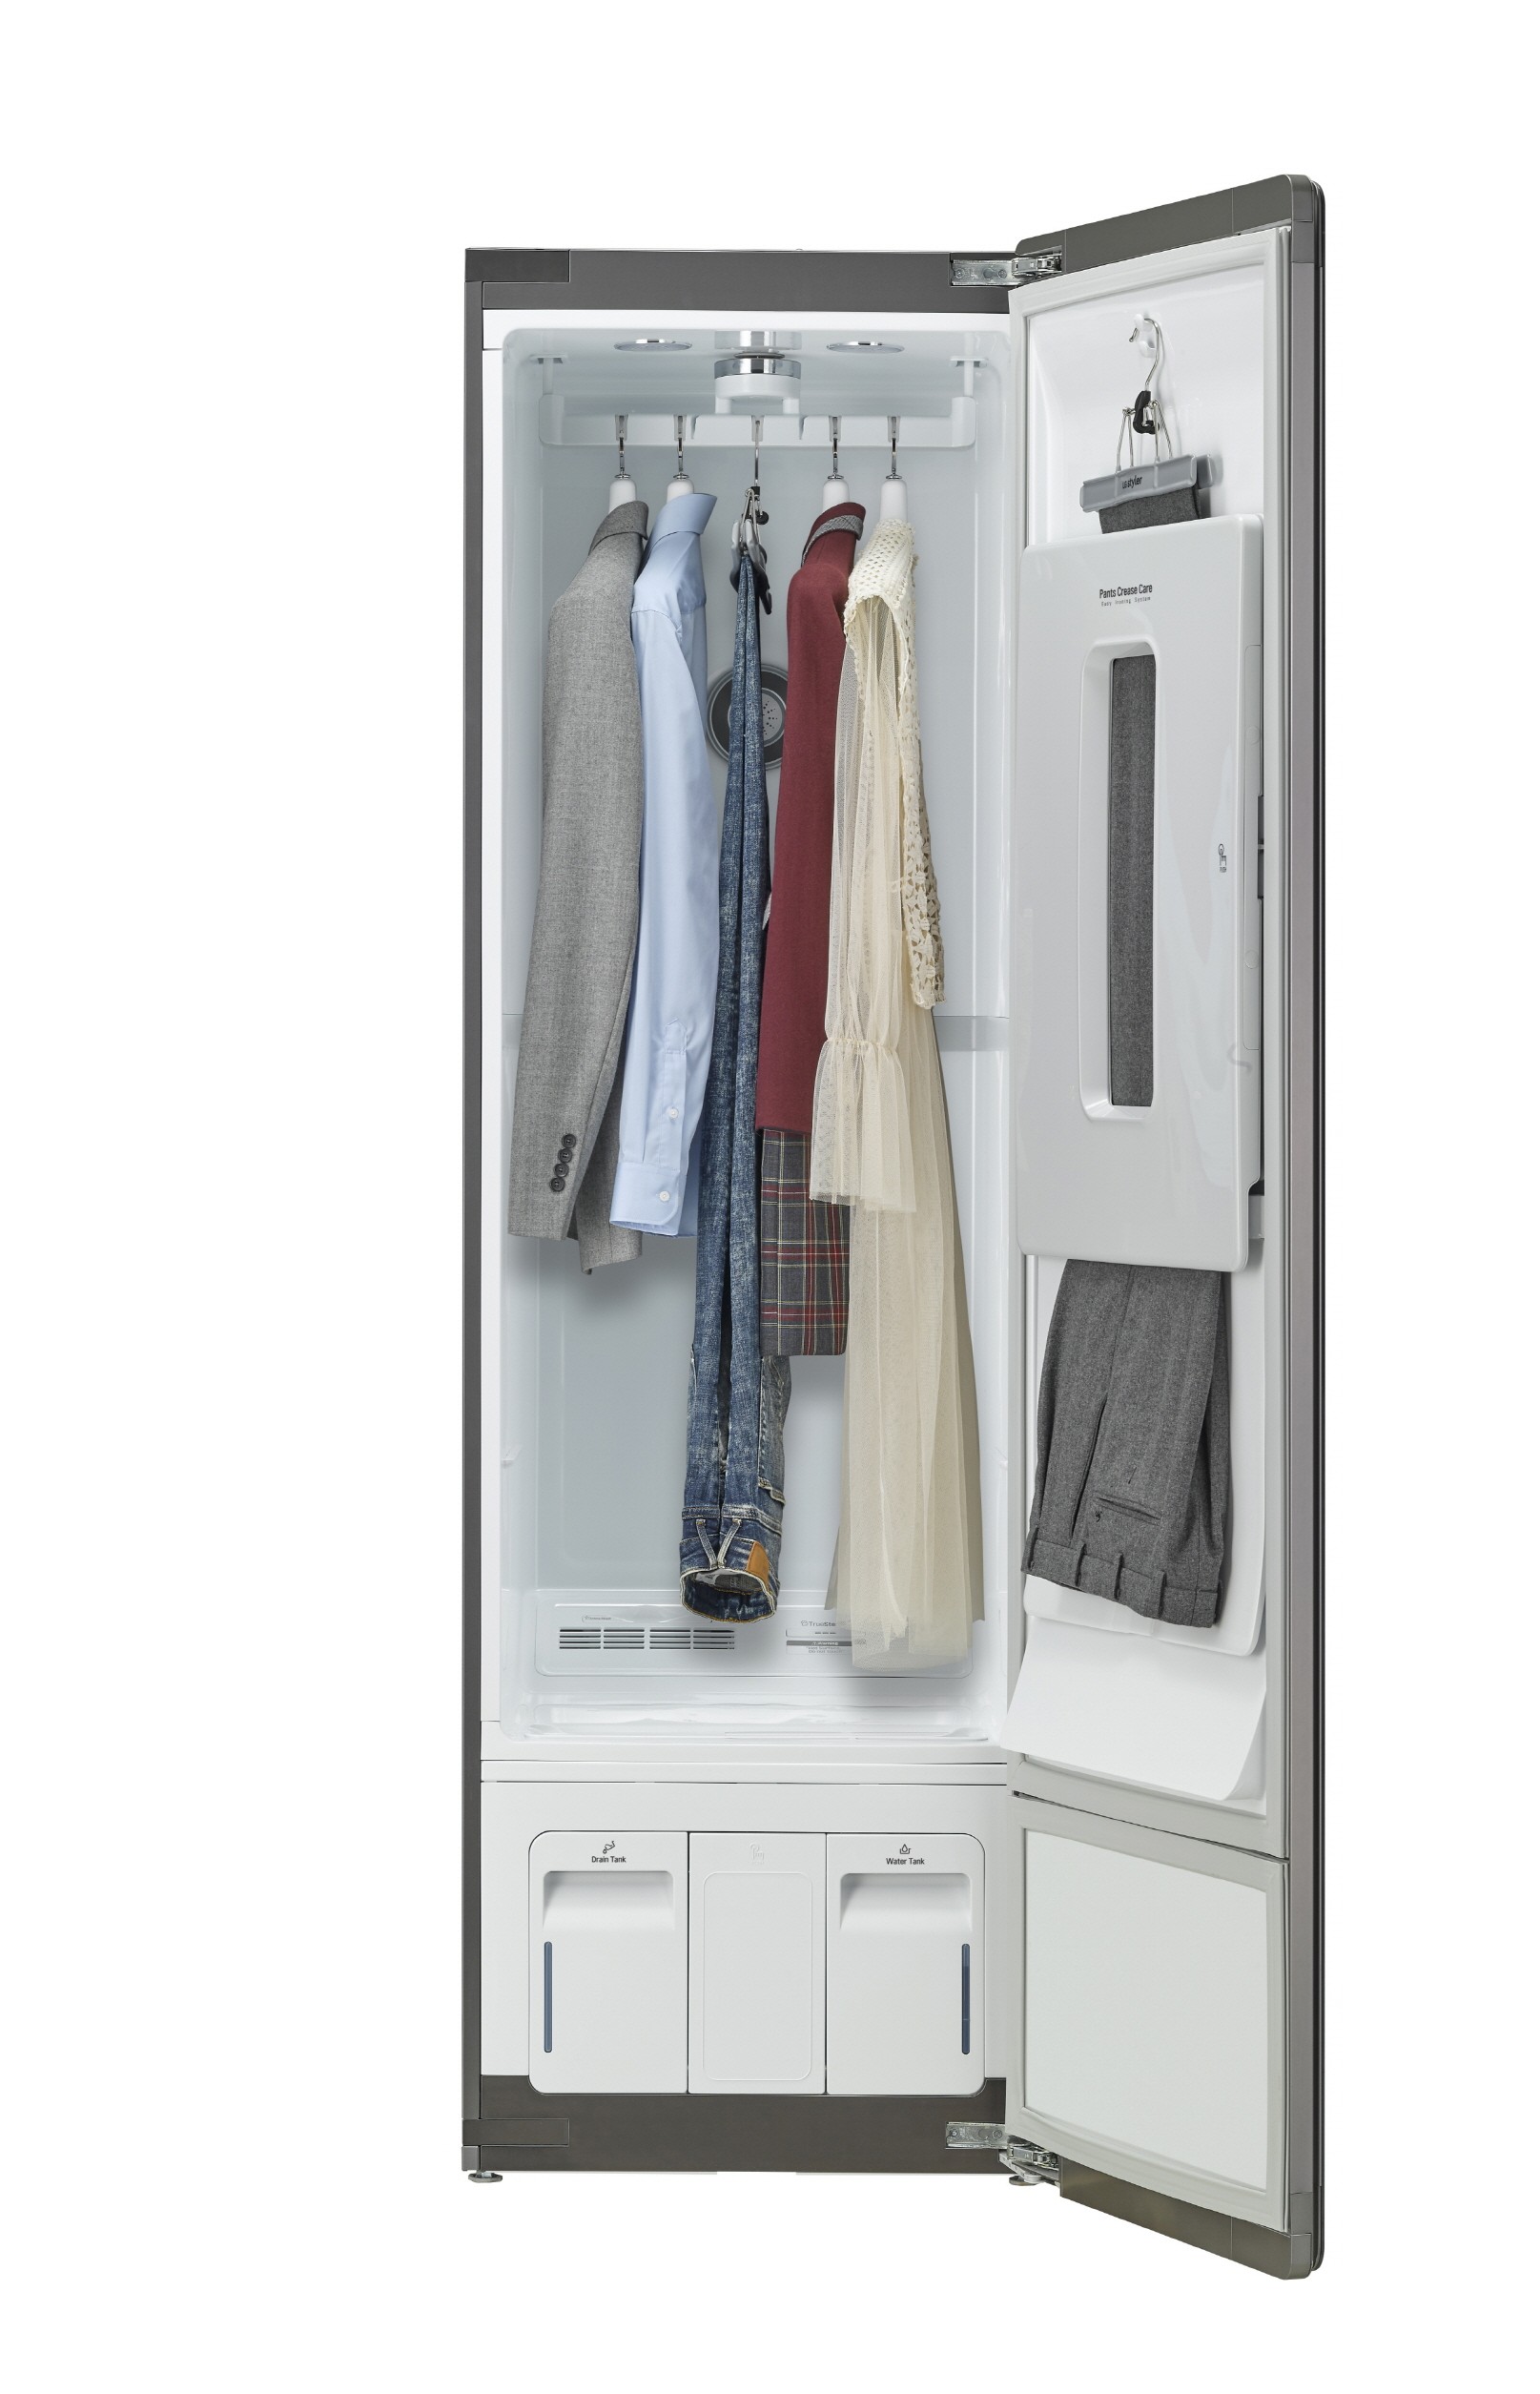 LG Styler with Black Tinted Mirror Glass Door wide open to show women’s dress, shirt and jackets hanging inside